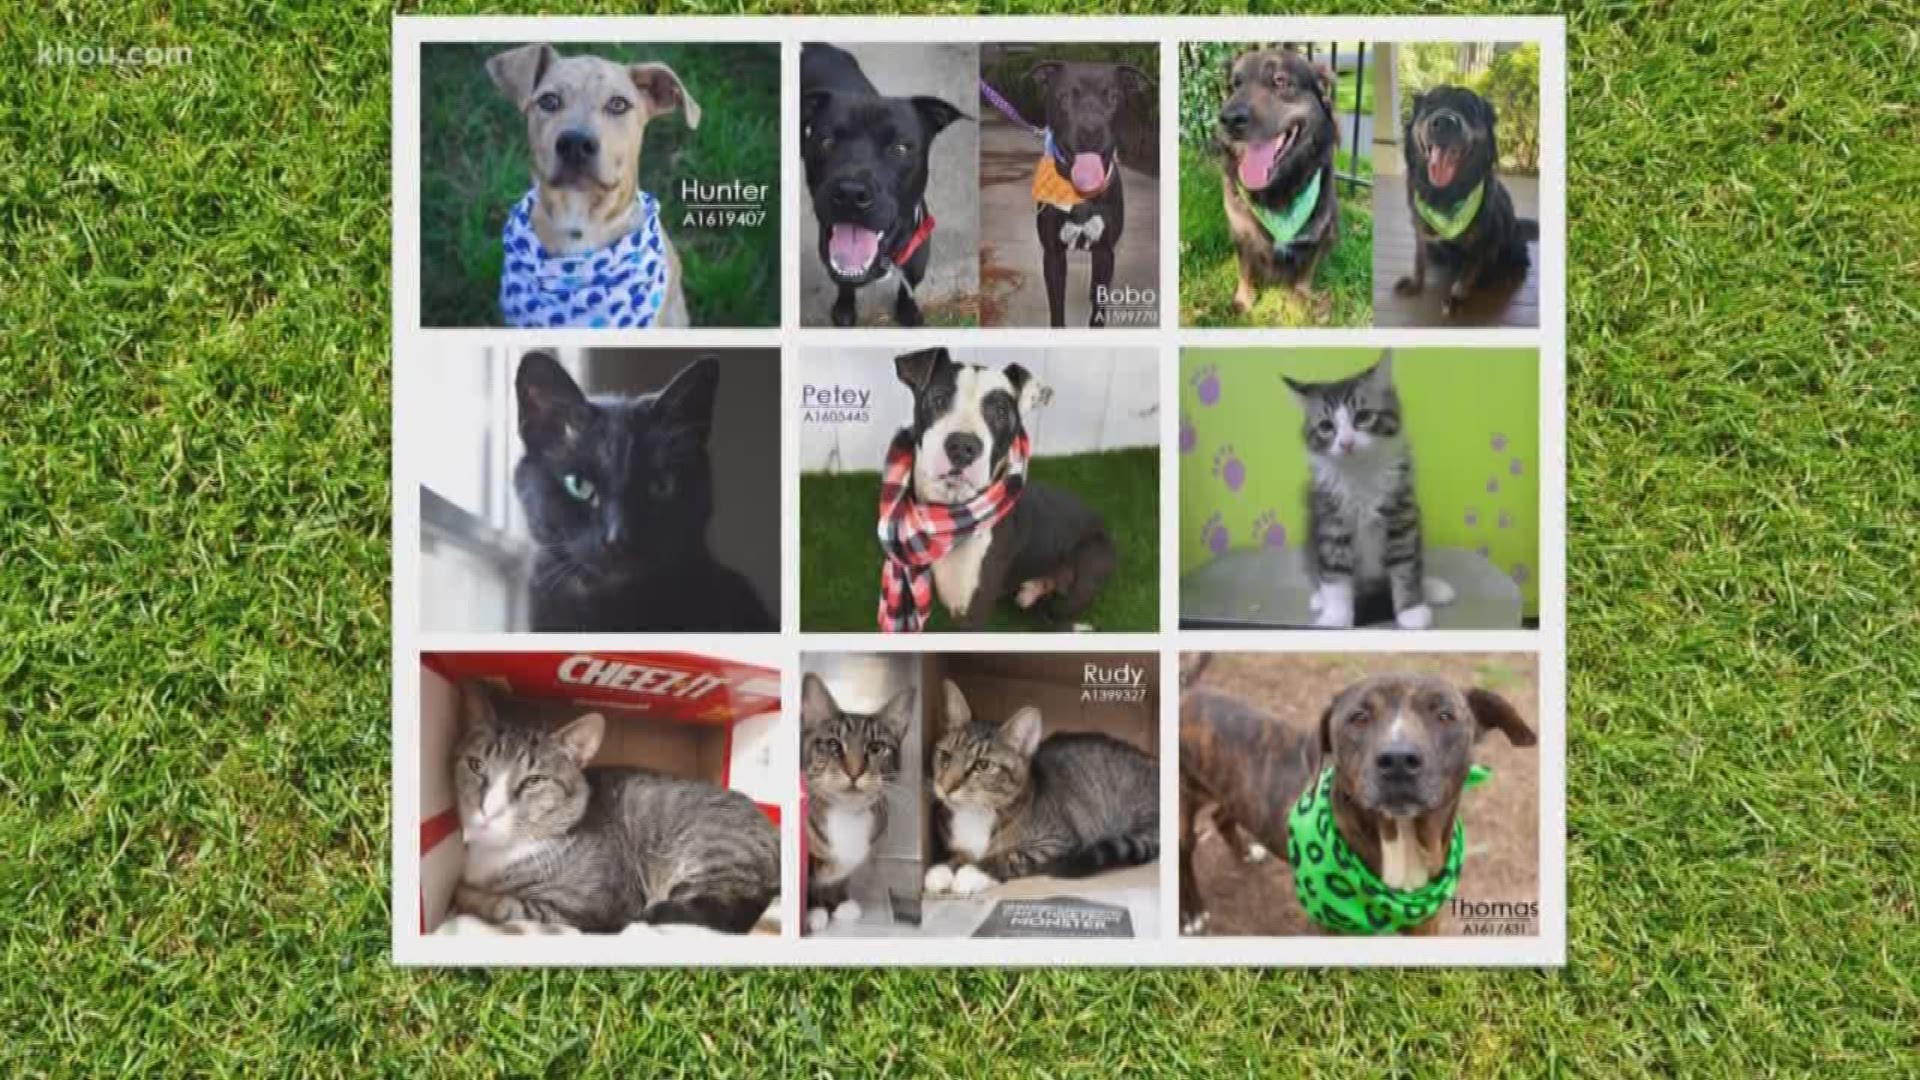 April 30 marks National Adopt a Shelter Pet Day and the city of Houston's BARC shelter is celebrating with discounted adoptions.